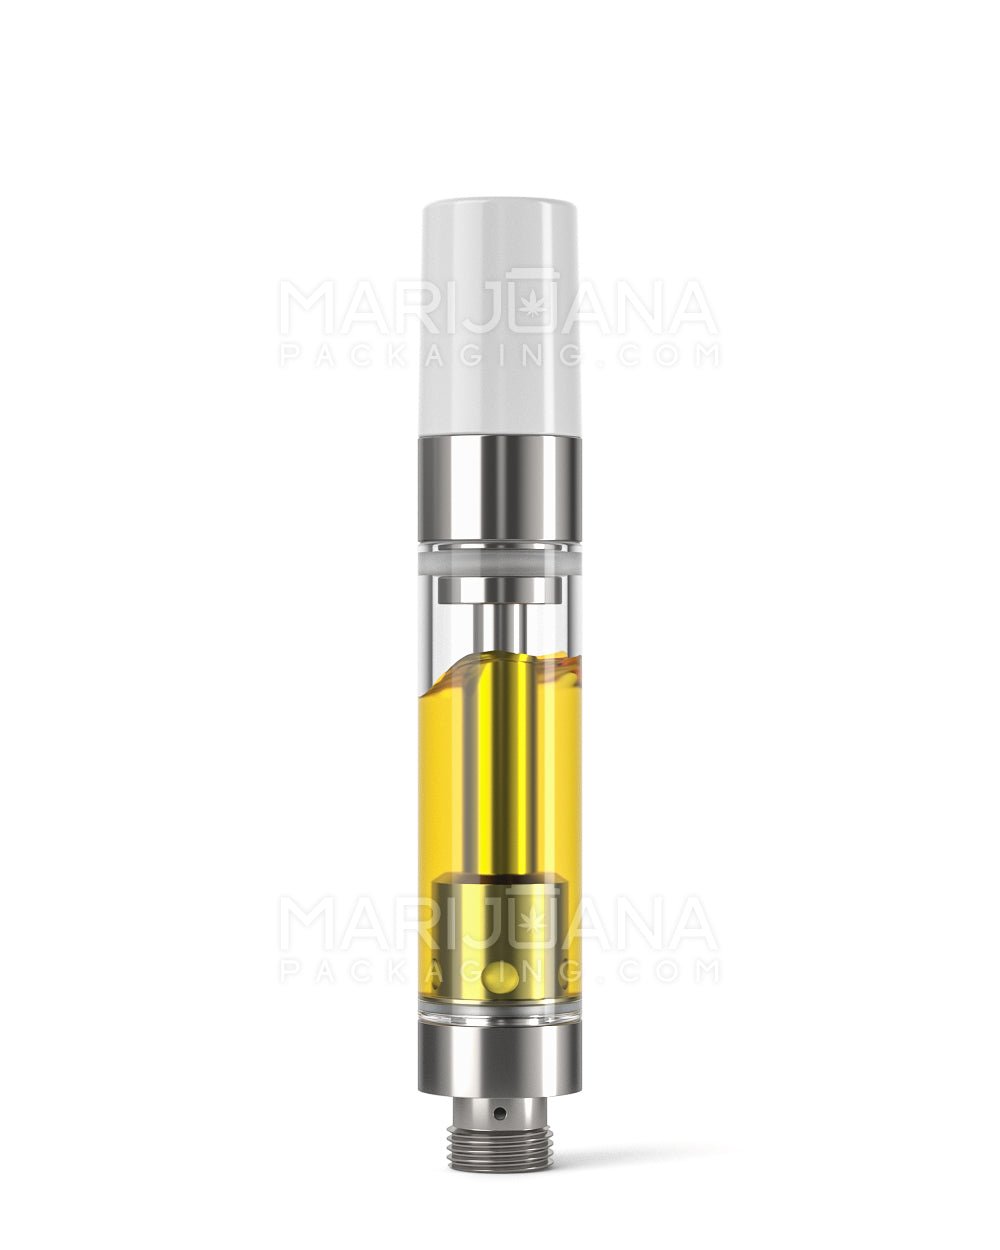 Ceramic Core Glass Vape Cartridge with Round White Plastic Mouthpiece | 1mL - Press On - 1200 Count - 2